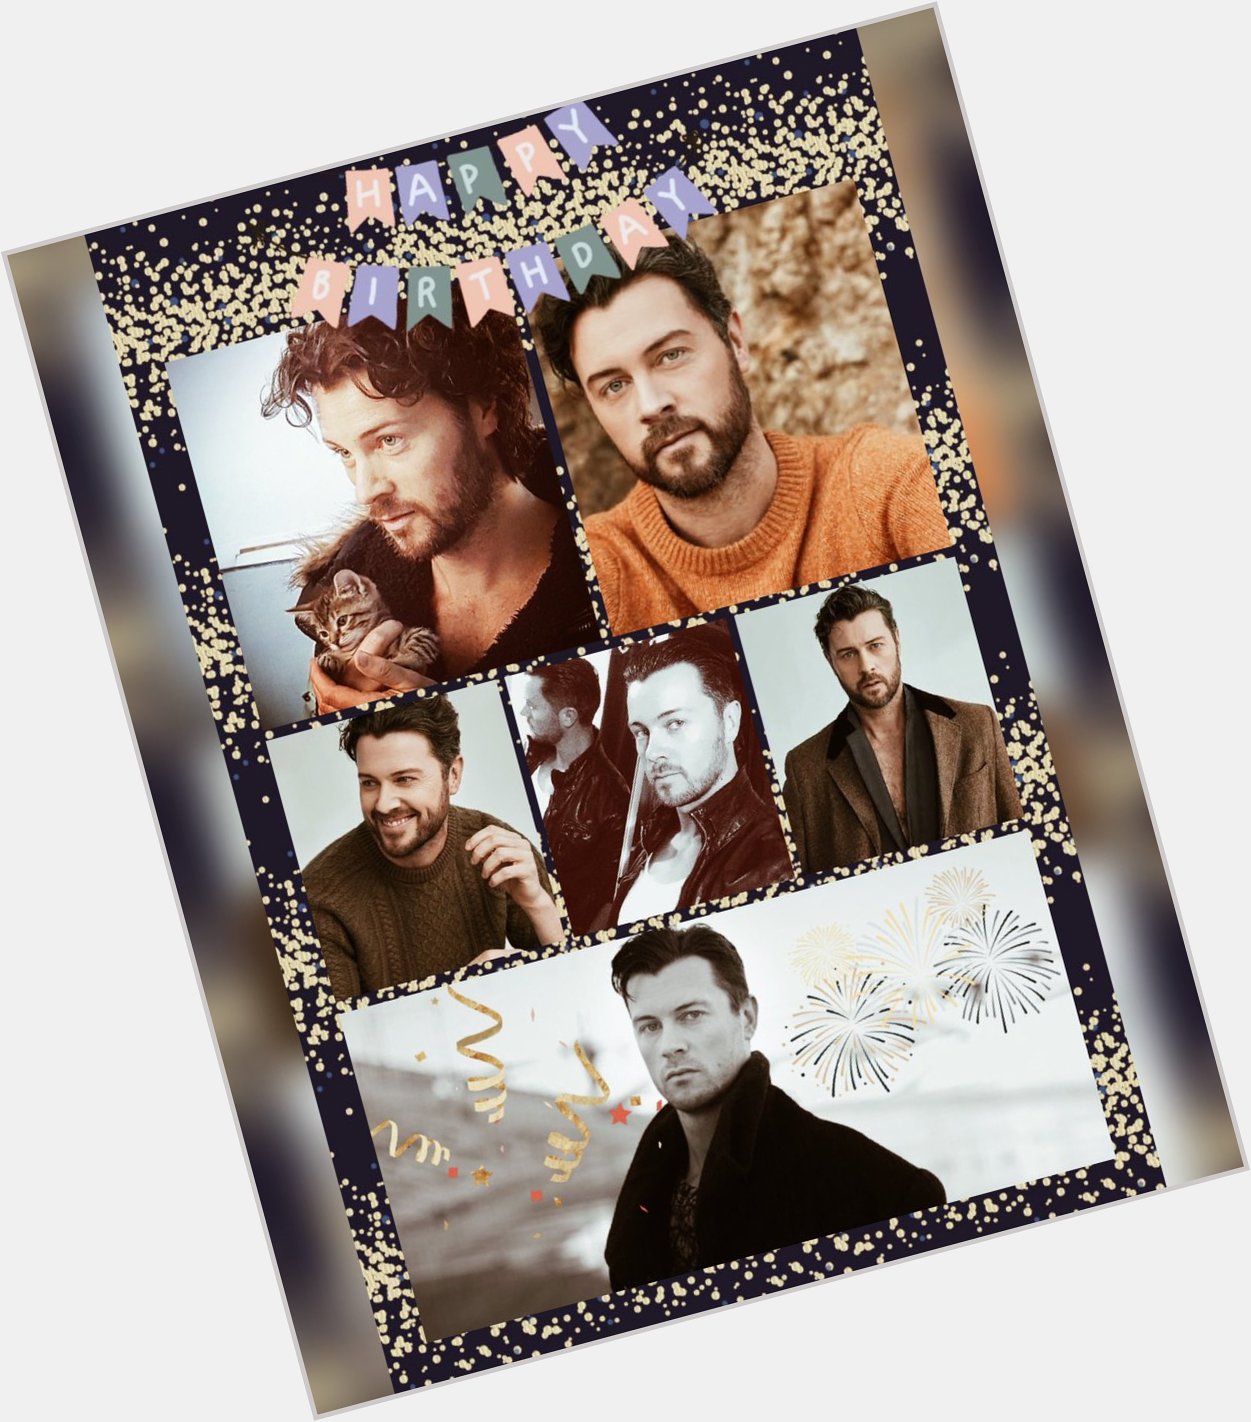  Wishing Dan Feuerriegel a very Happy Birthday! May all your wishes come true!   Cheers!   